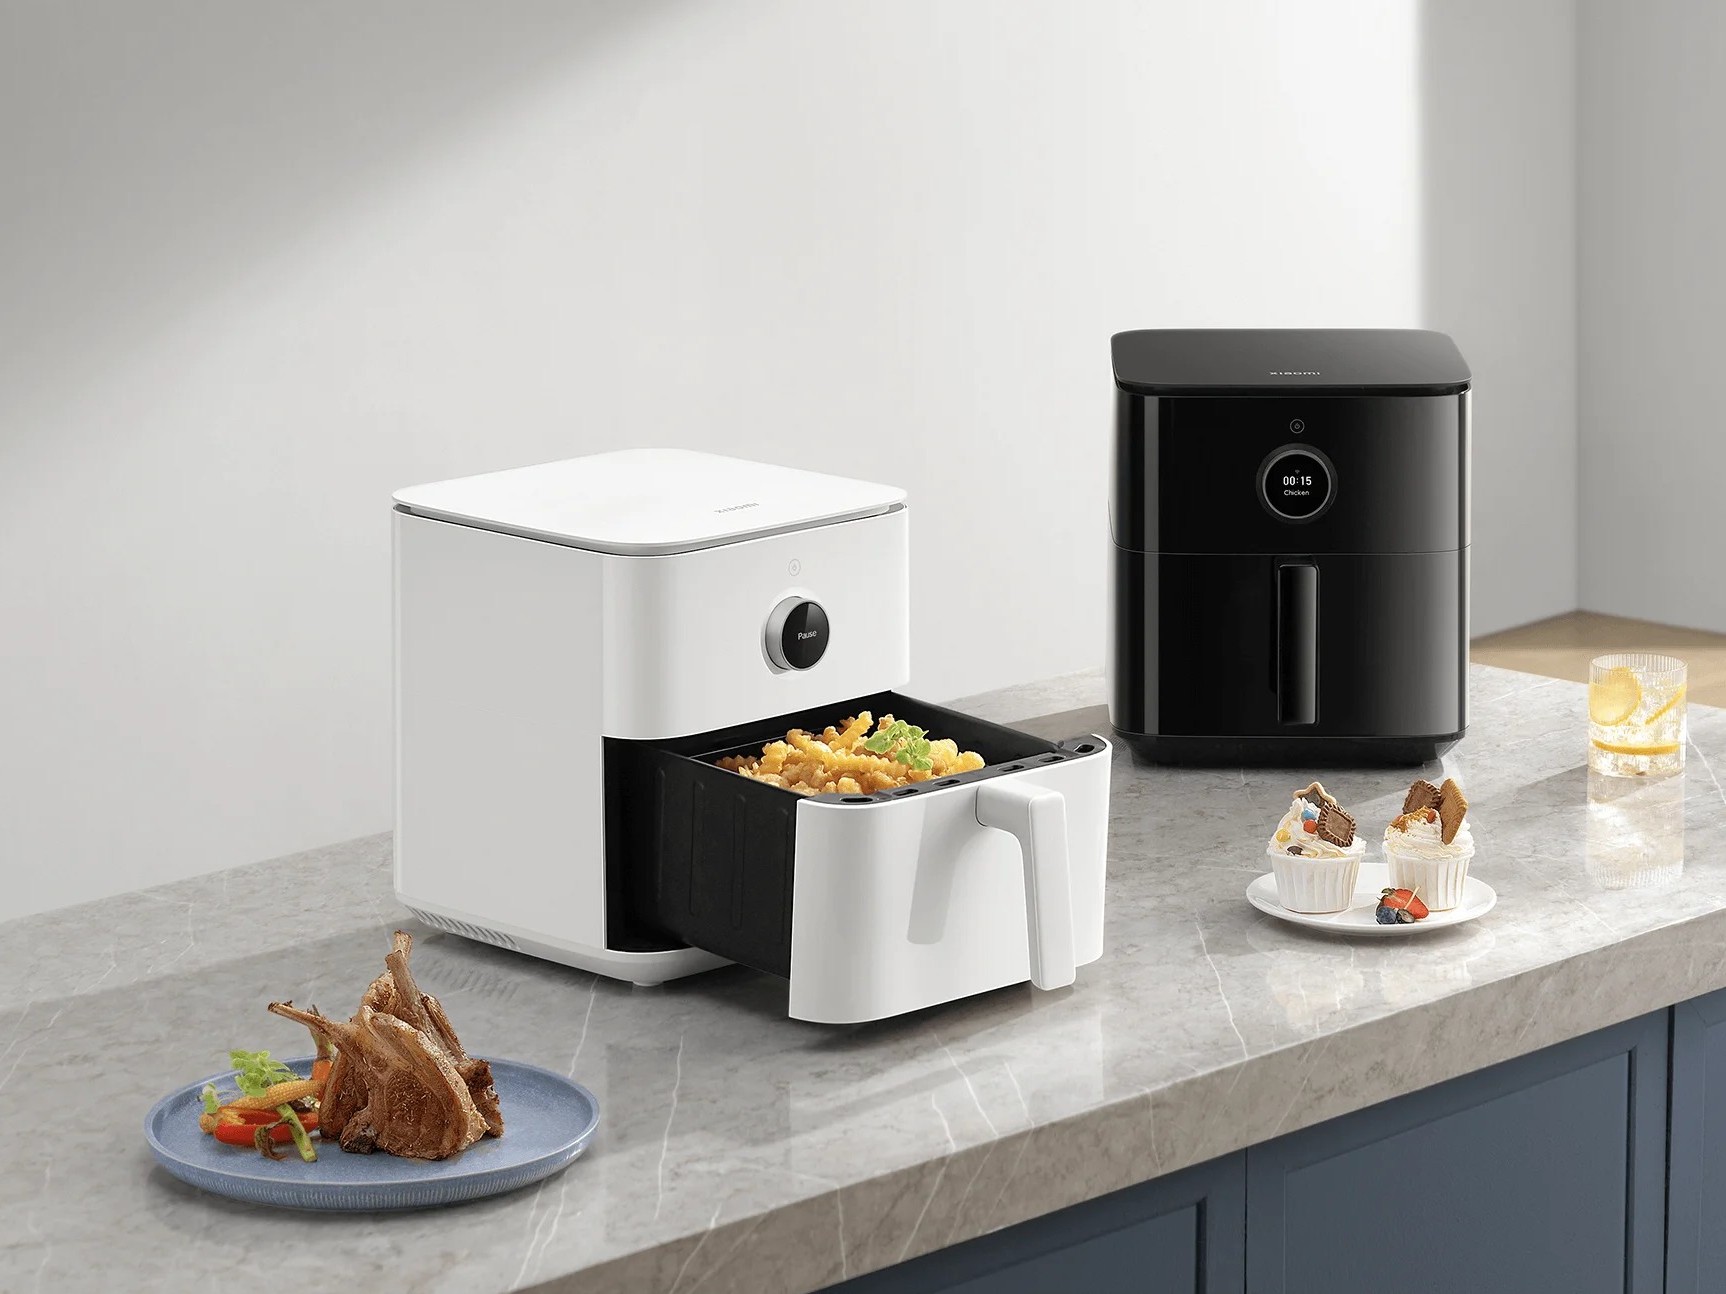 Xiaomi's new smart devices include an air fryer and an electric scooter